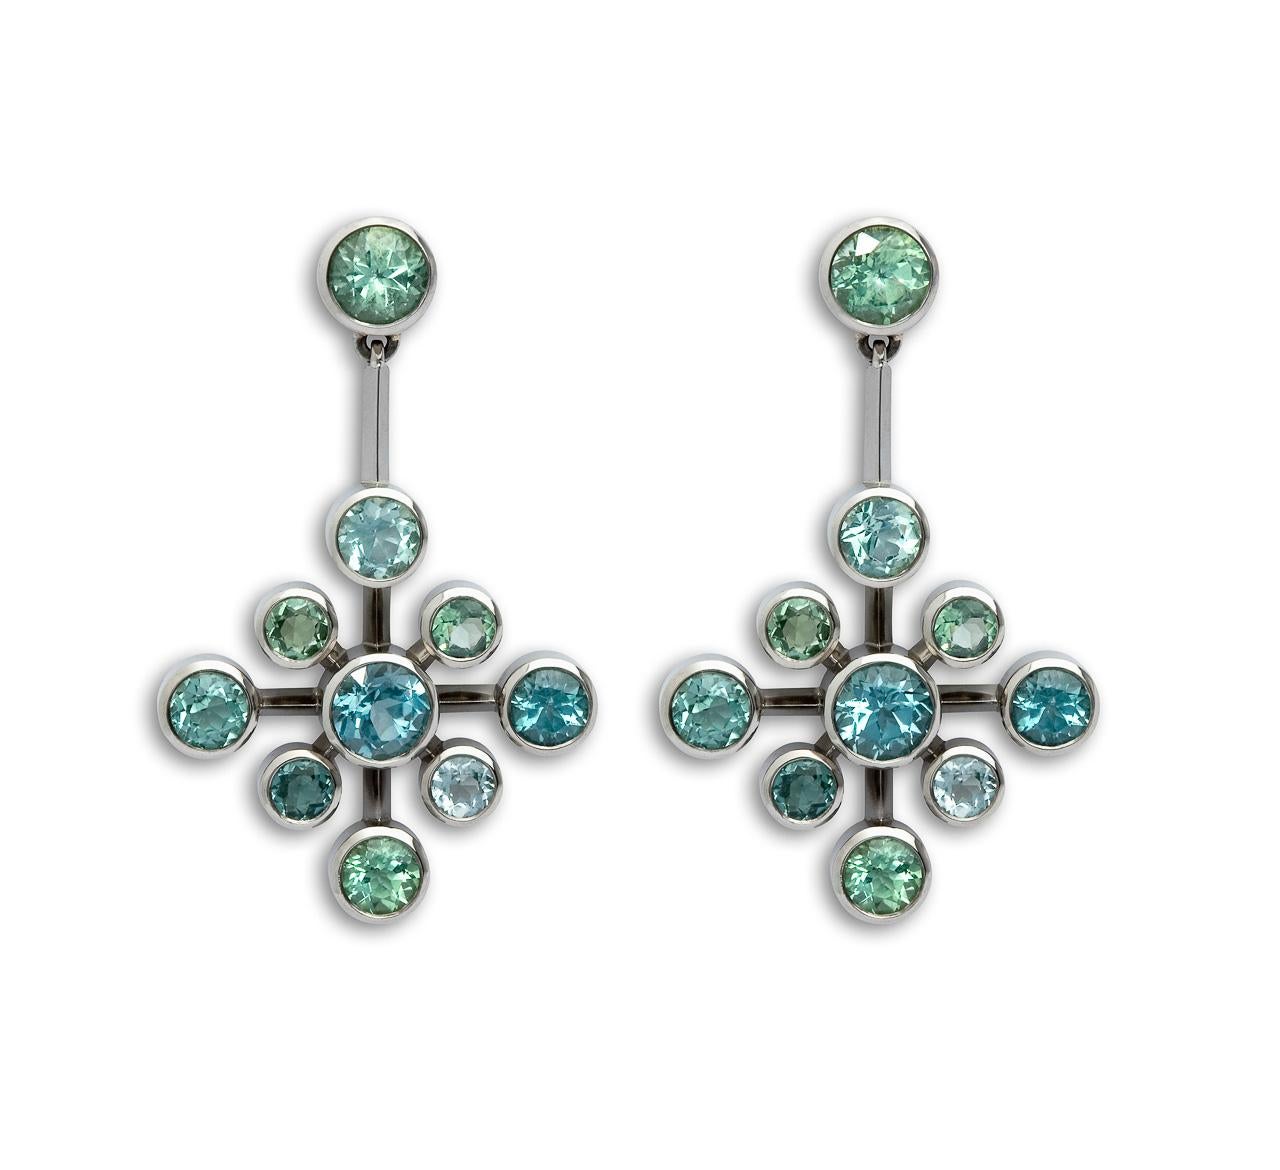 One of a kind ice crystal earrings feature 20 blue and green tourmaline and are set 18K white gold.